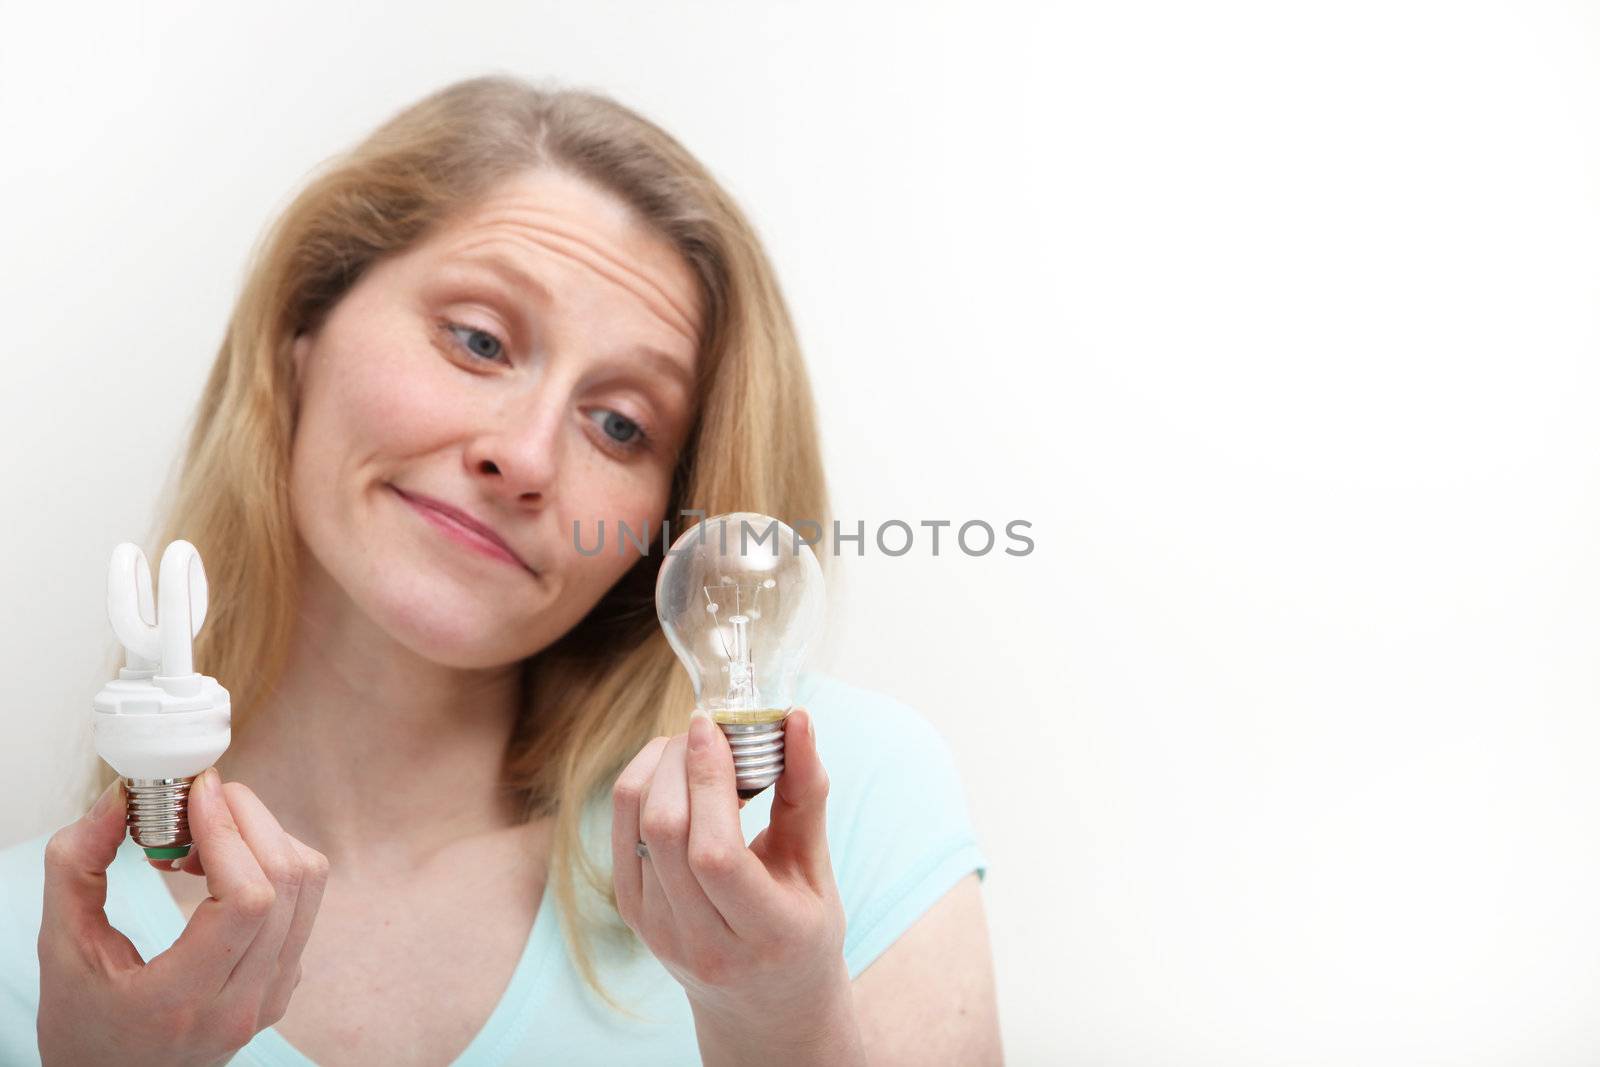 Pretty girl looks disapprovingly at old style lightbulb compared to the new technology type